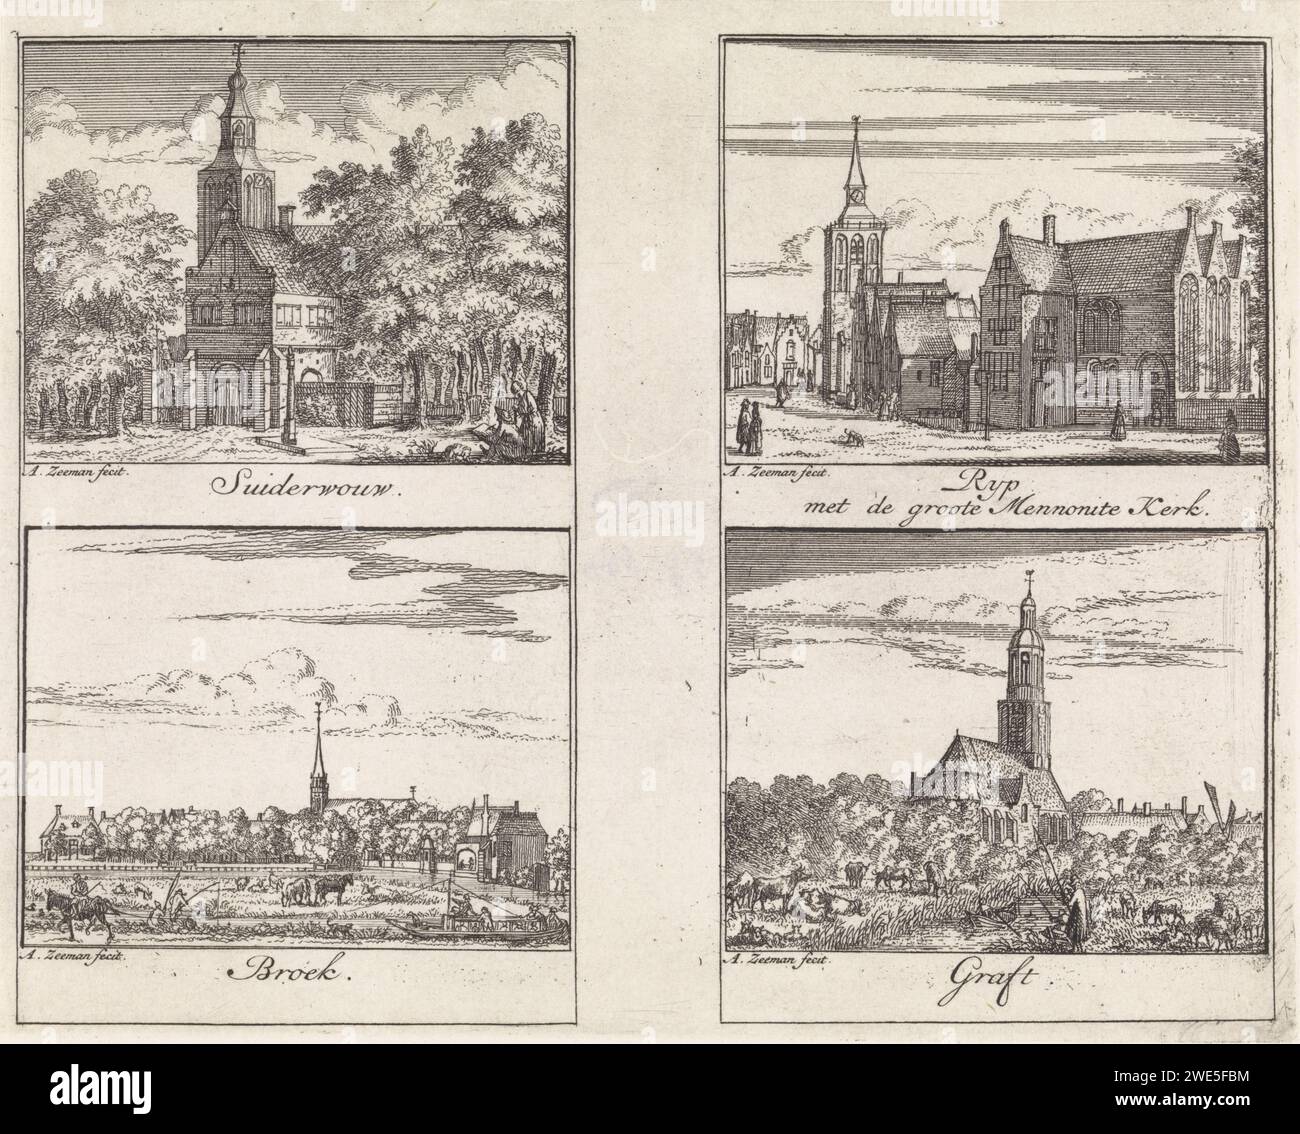 Faces on Zuiderwoude, Broek in Waterland, De Rijp and Graft, Abraham Zeeman, 1732 print Four performances on a magazine. At the top left: View of Zuiderwoude. Bottom left: View of Broek in Waterland. At the top right: View of the Church of De Rijp. At the bottom right: View of Graft. Amsterdam paper etching prospect of village, silhouette of village Zuiderwoude. Pants in Waterland. The ripe. Graft Stock Photo